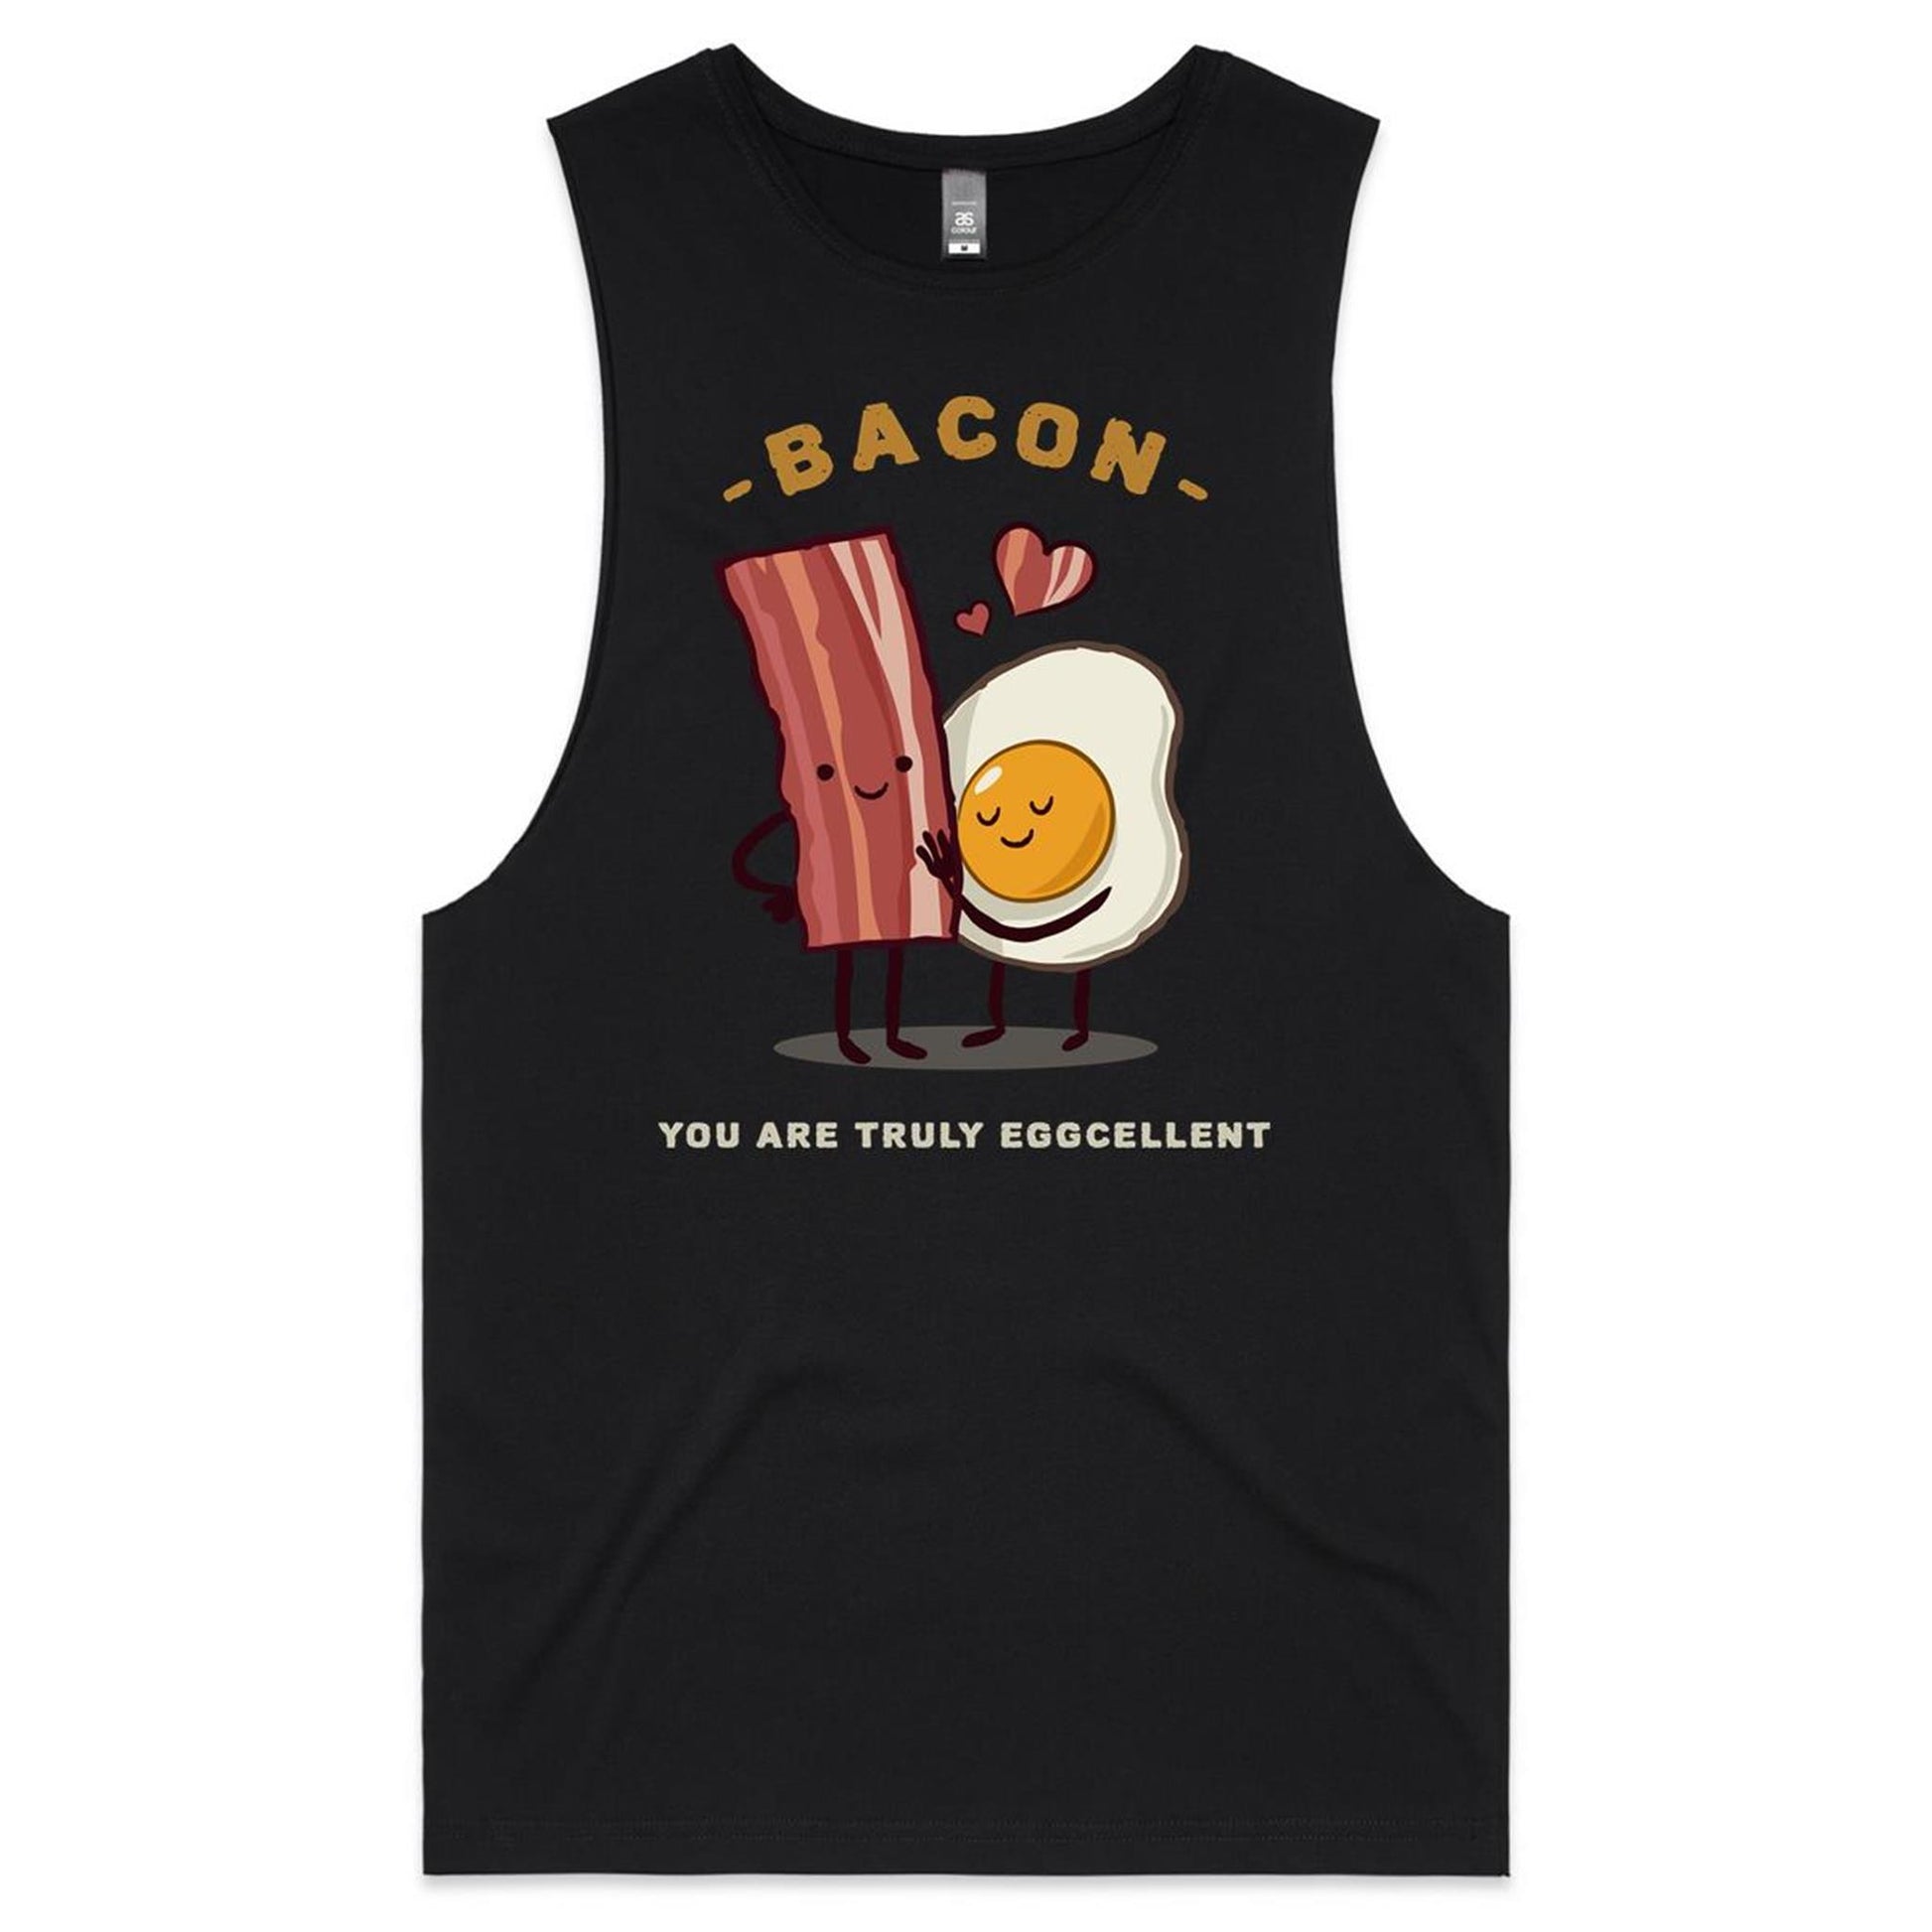 Bacon, You Are Truly Eggcellent - Mens Tank Top Tee Black Mens Tank Tee